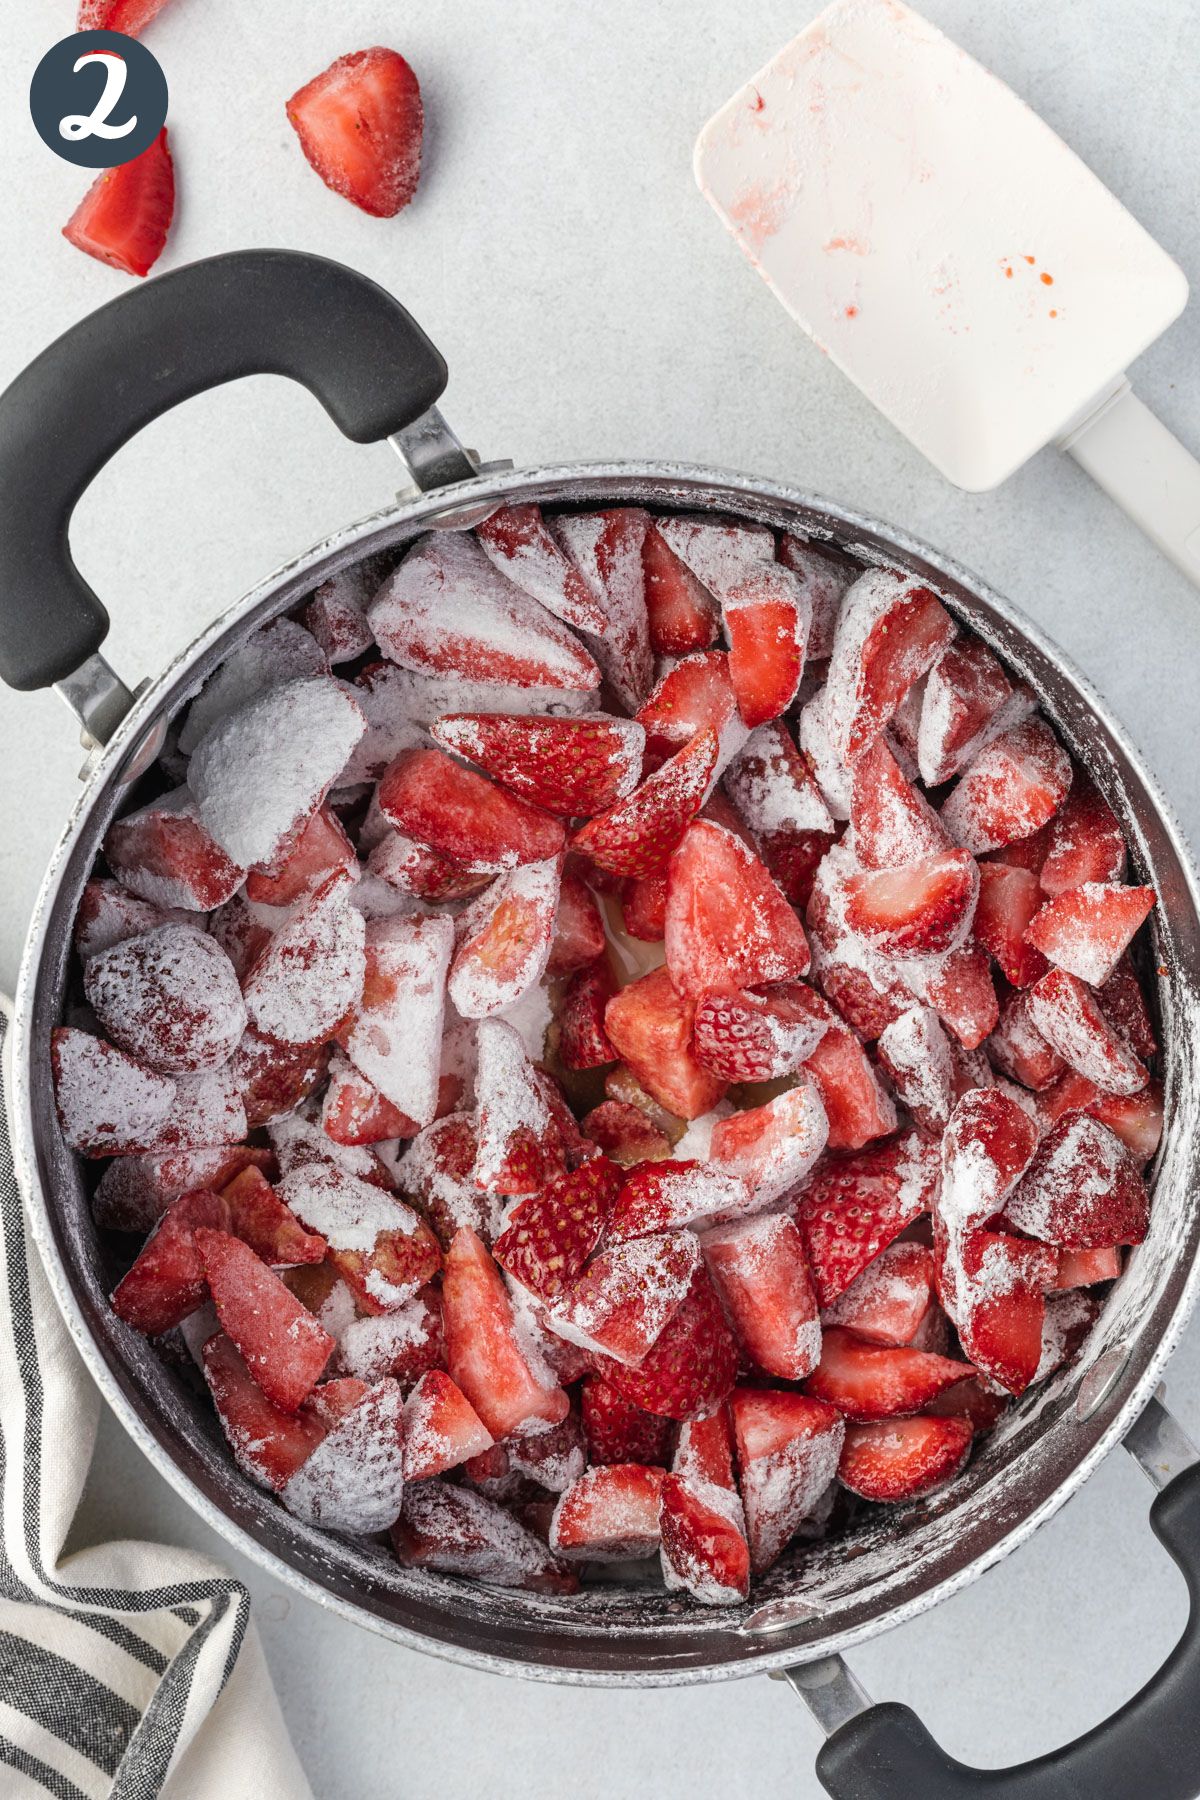 Strawberries ina  large pan coated with sugar and cornstarh mixture.